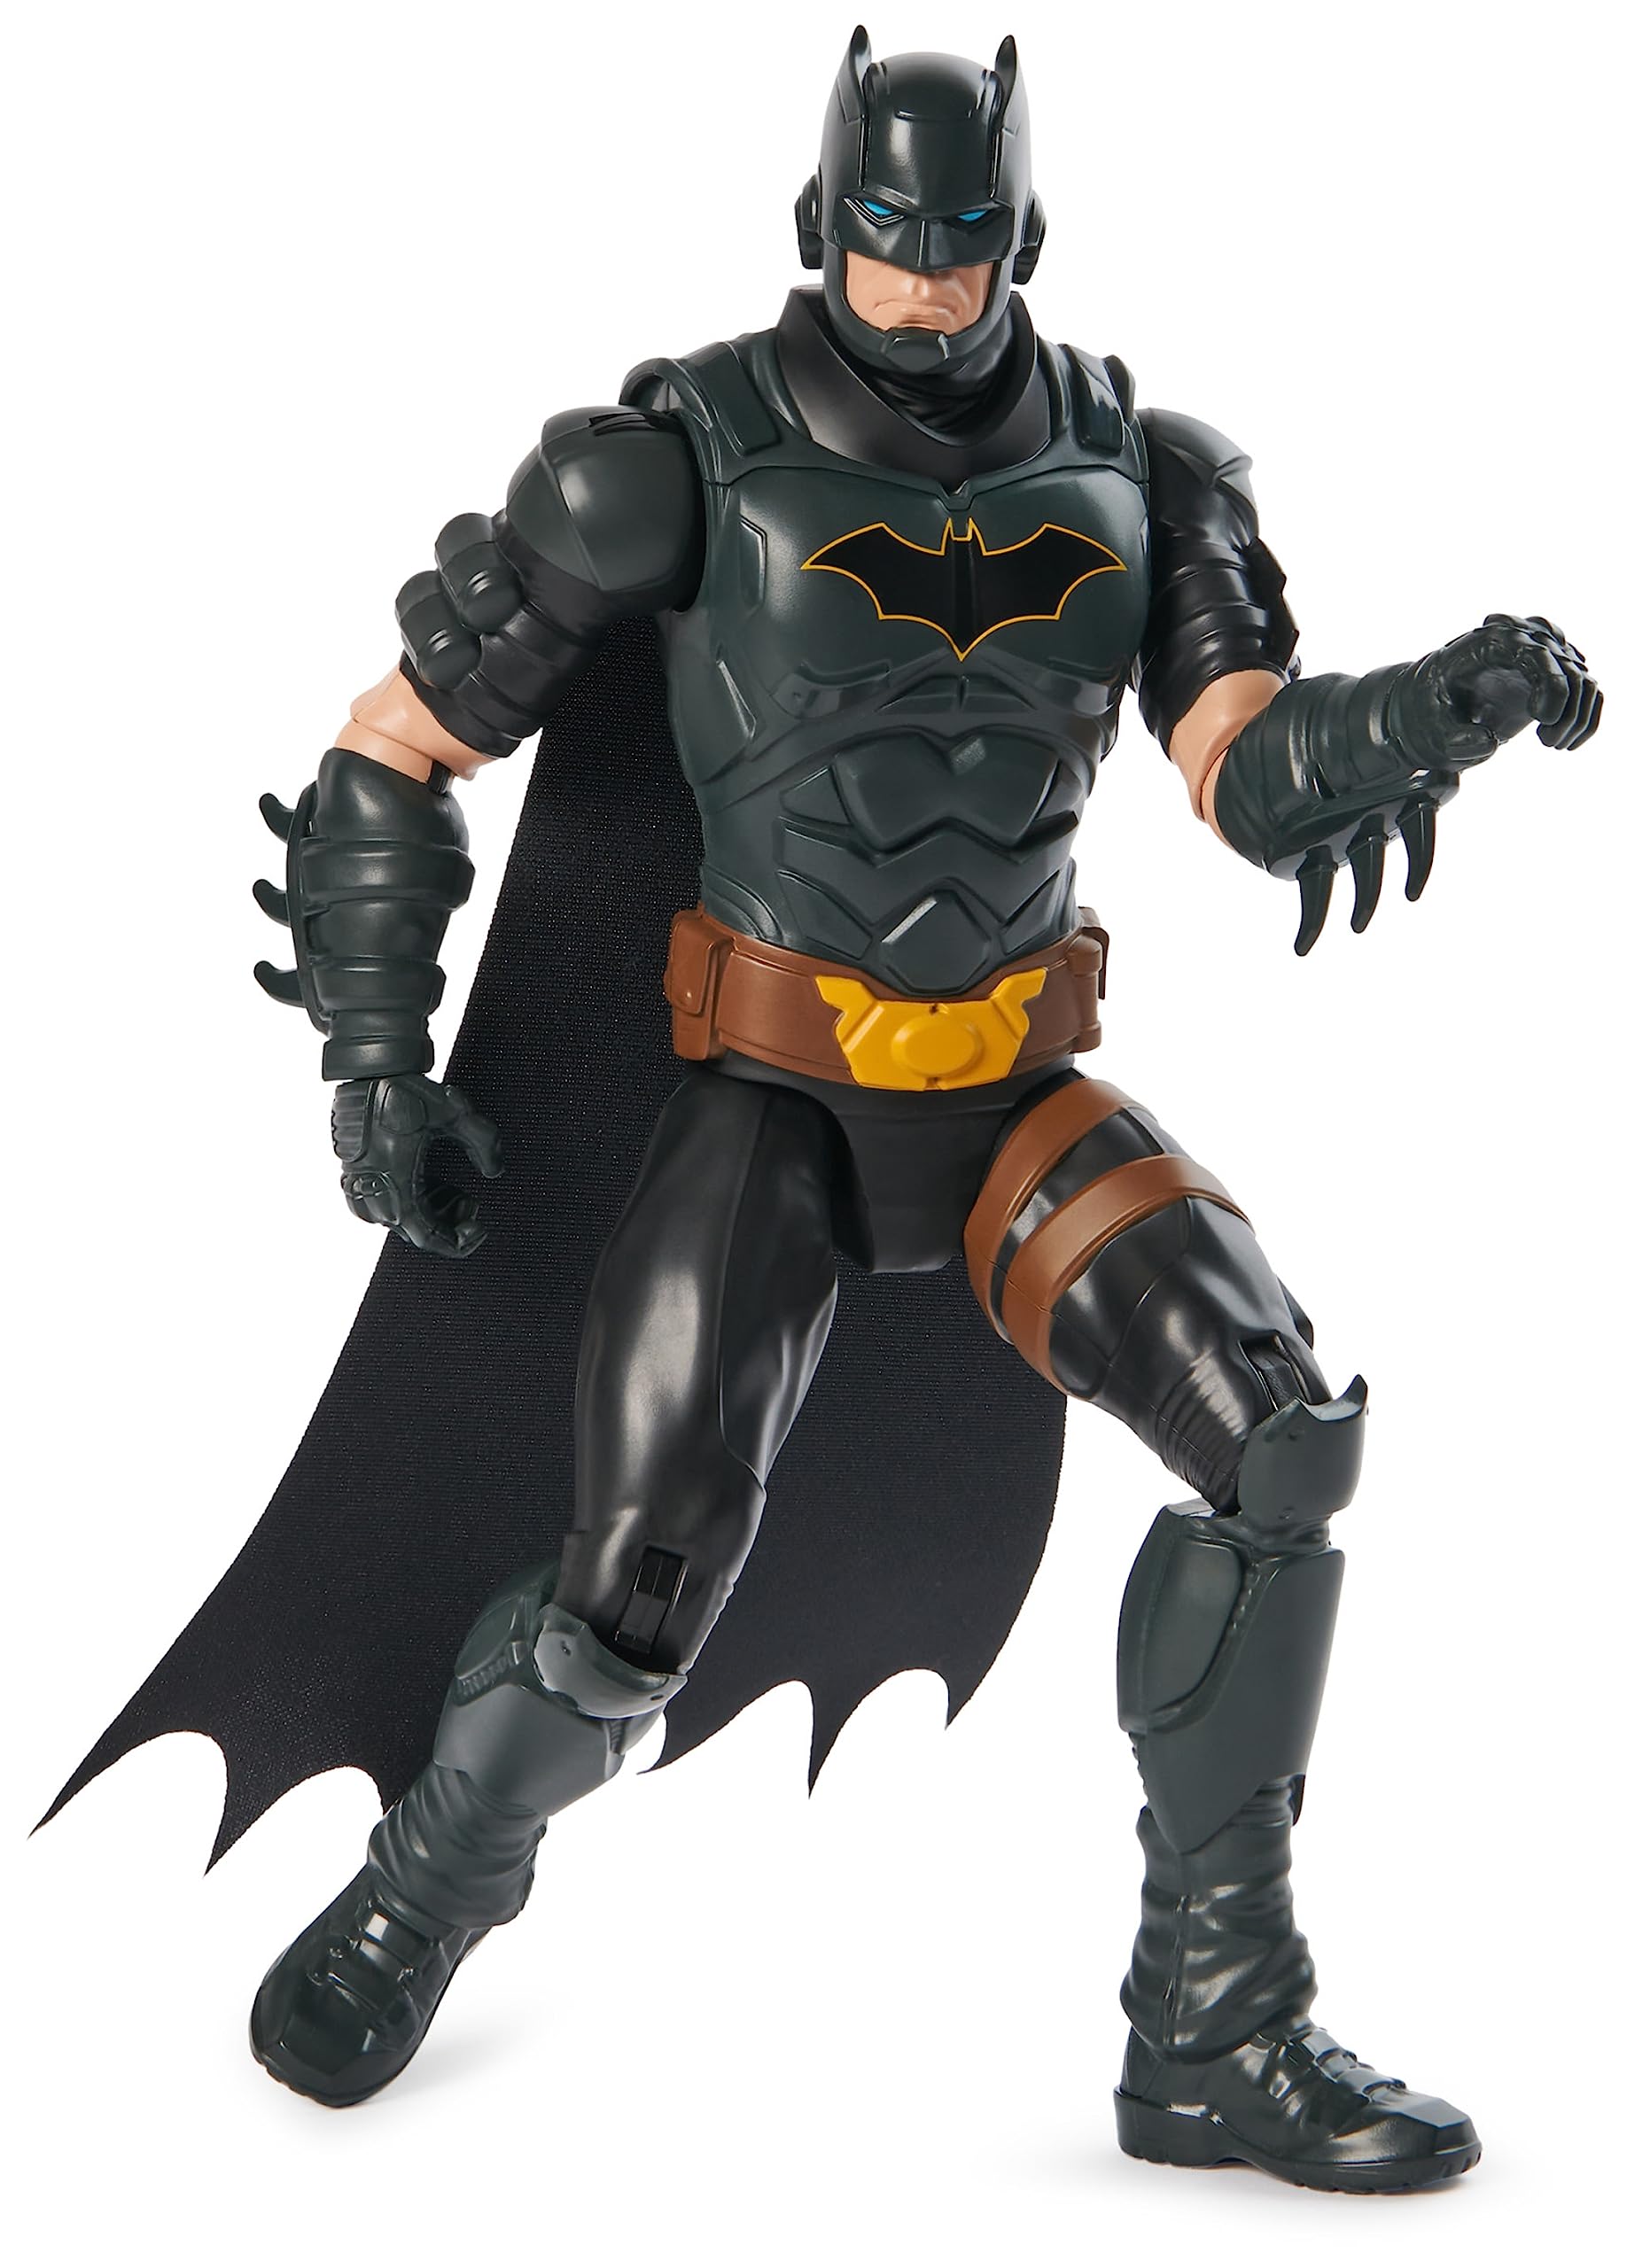 12" DC Comics Batman Action Figure $5 + Free Shipping w/ Prime or on orders over $35